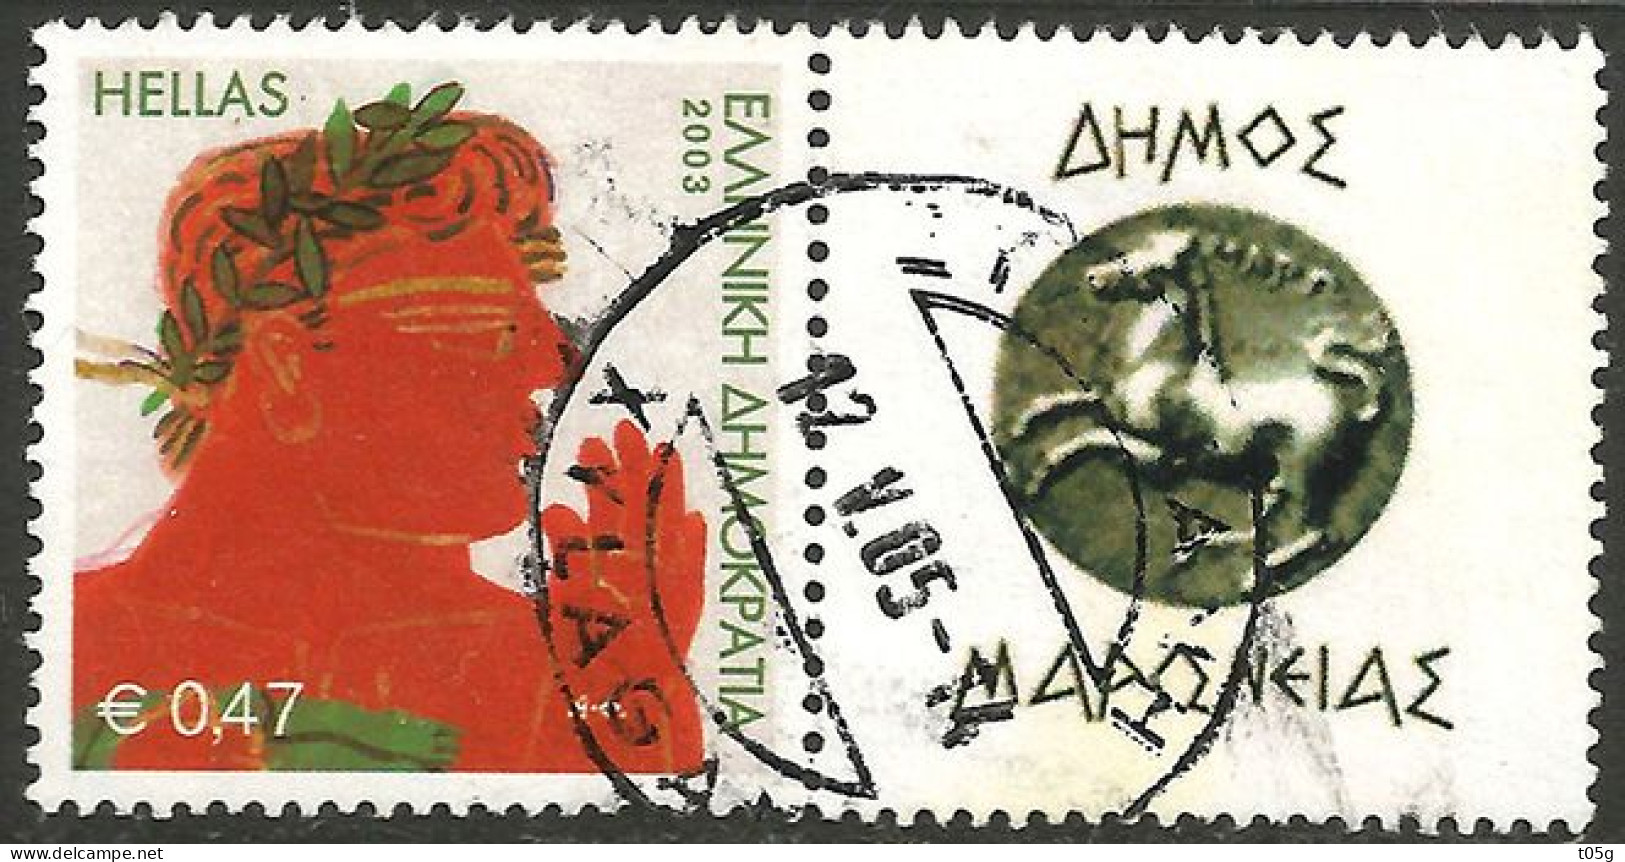 GREECE- GRECE- HELLAS 2005: Personalised Stamps Of Municipality Of Maronias Used - Used Stamps